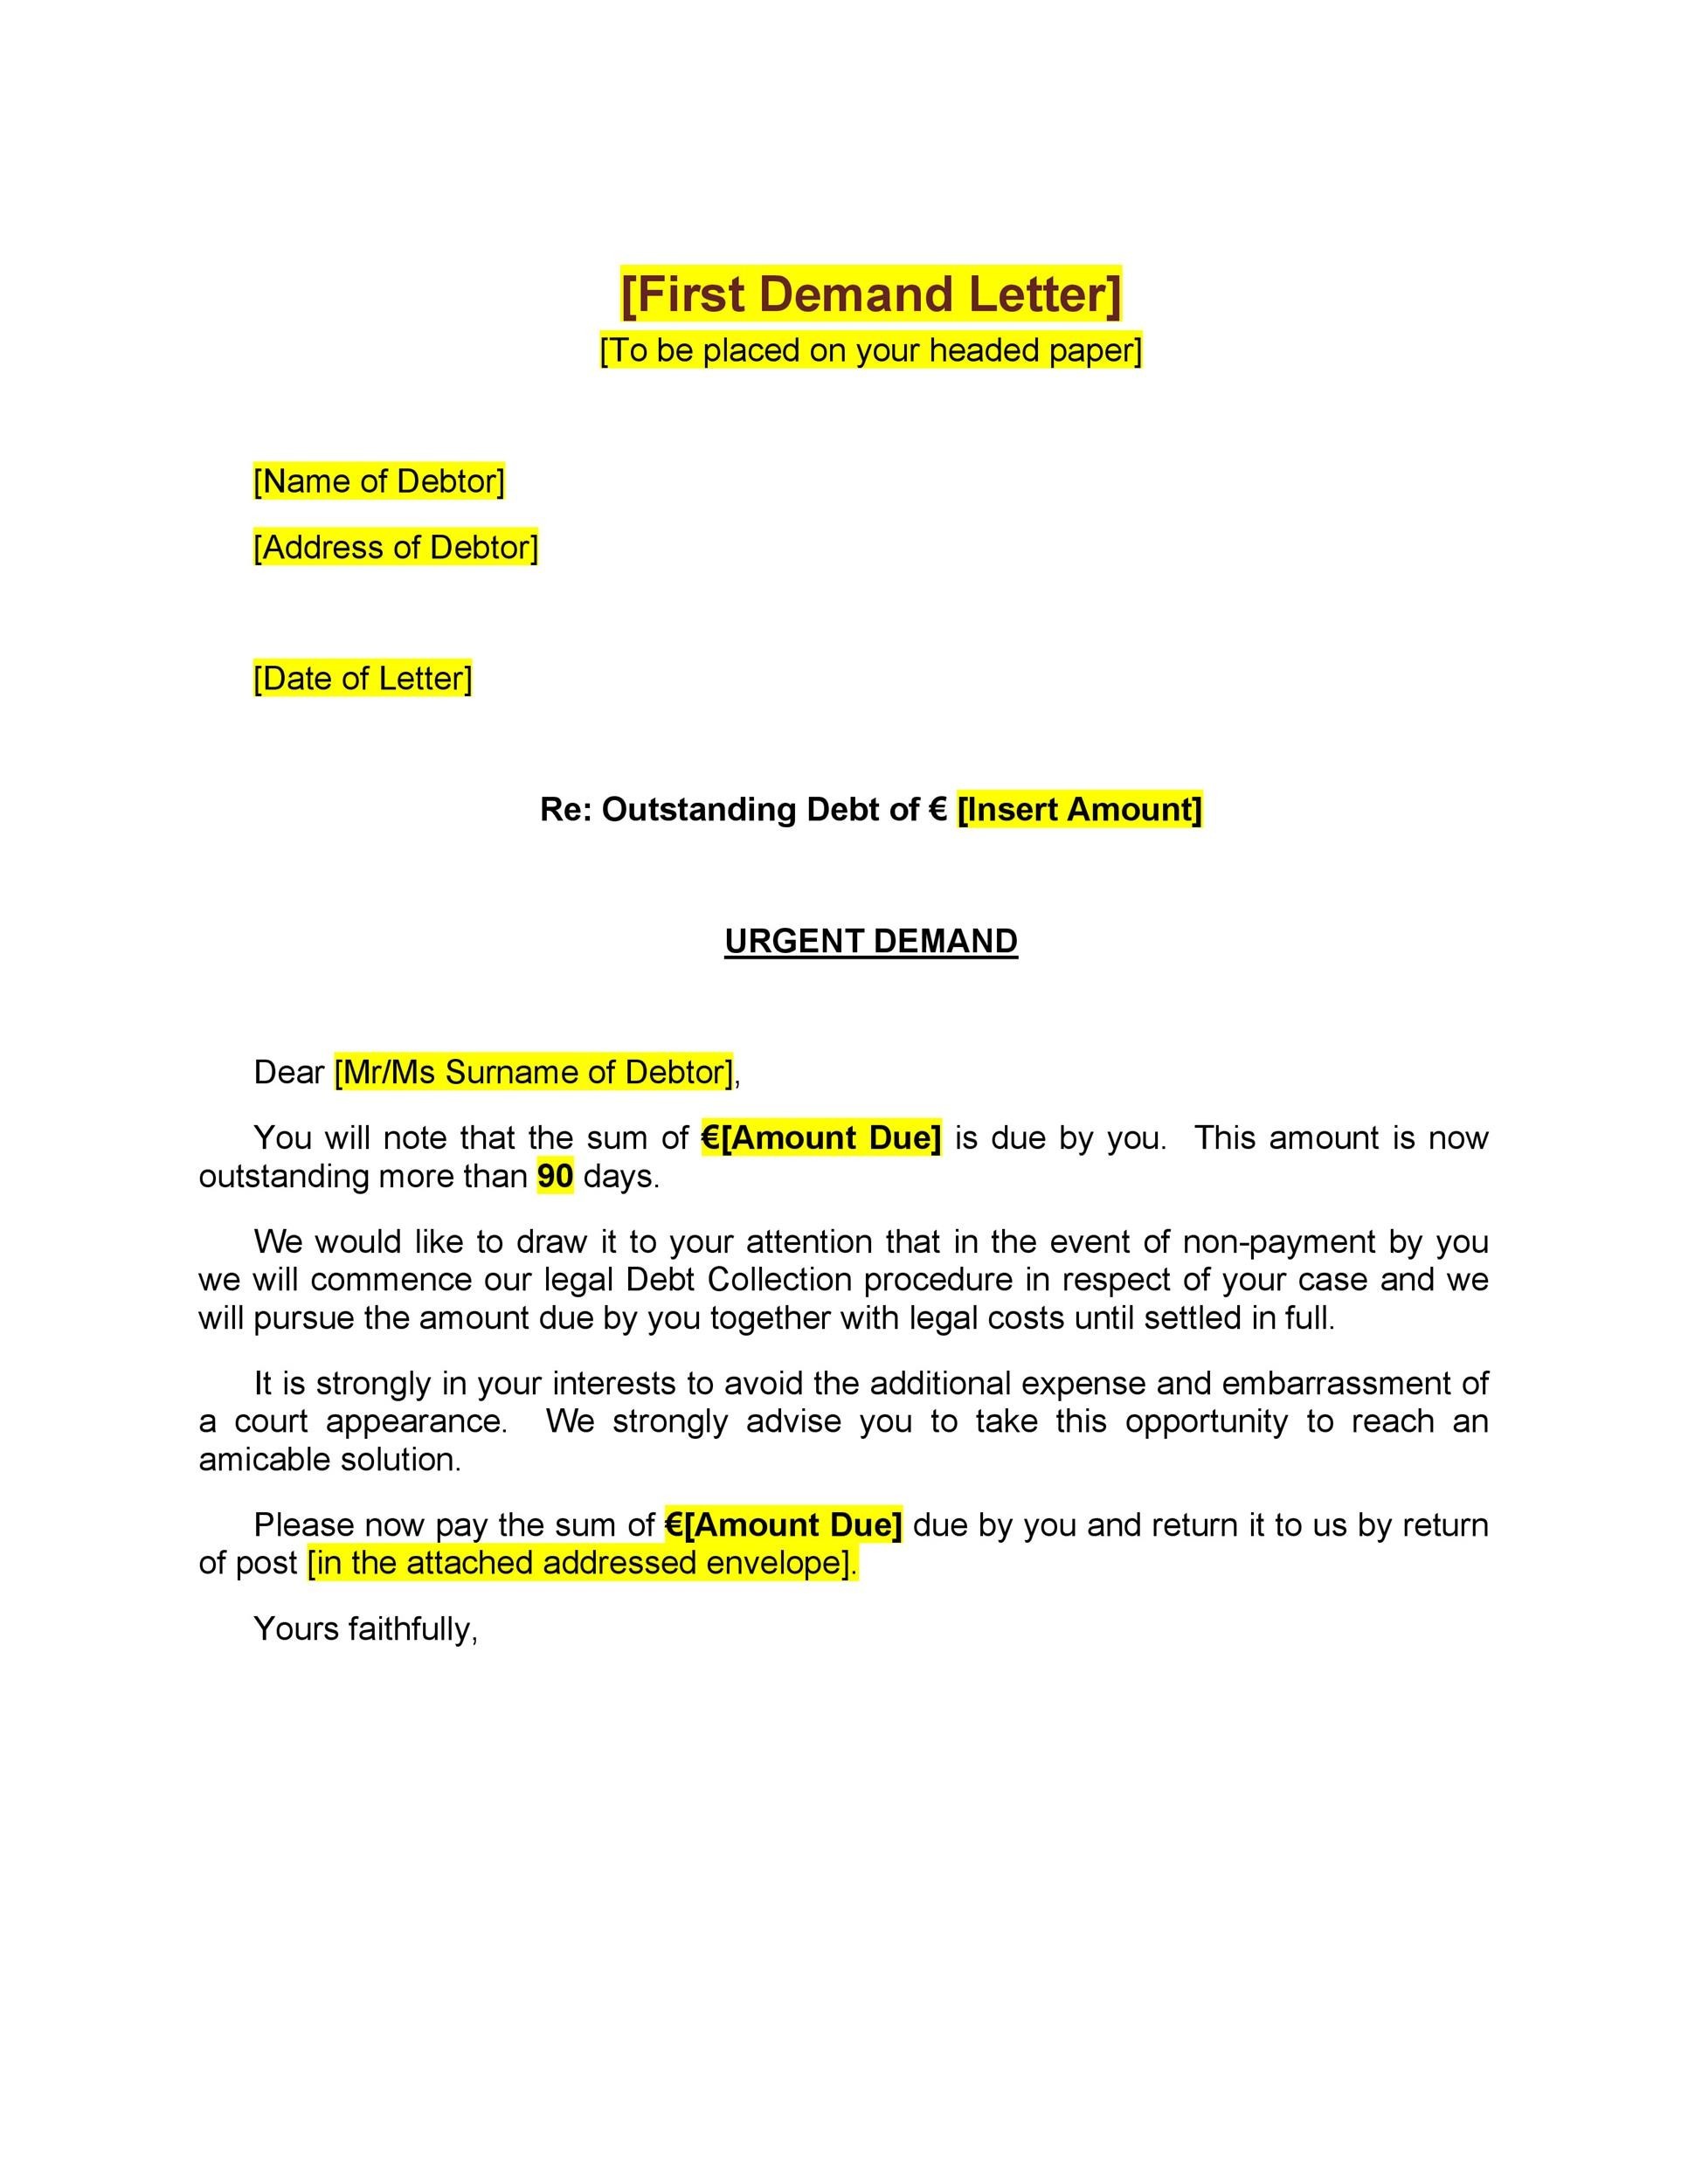 sample-demand-letter-for-small-claims-philippines-onvacationswall